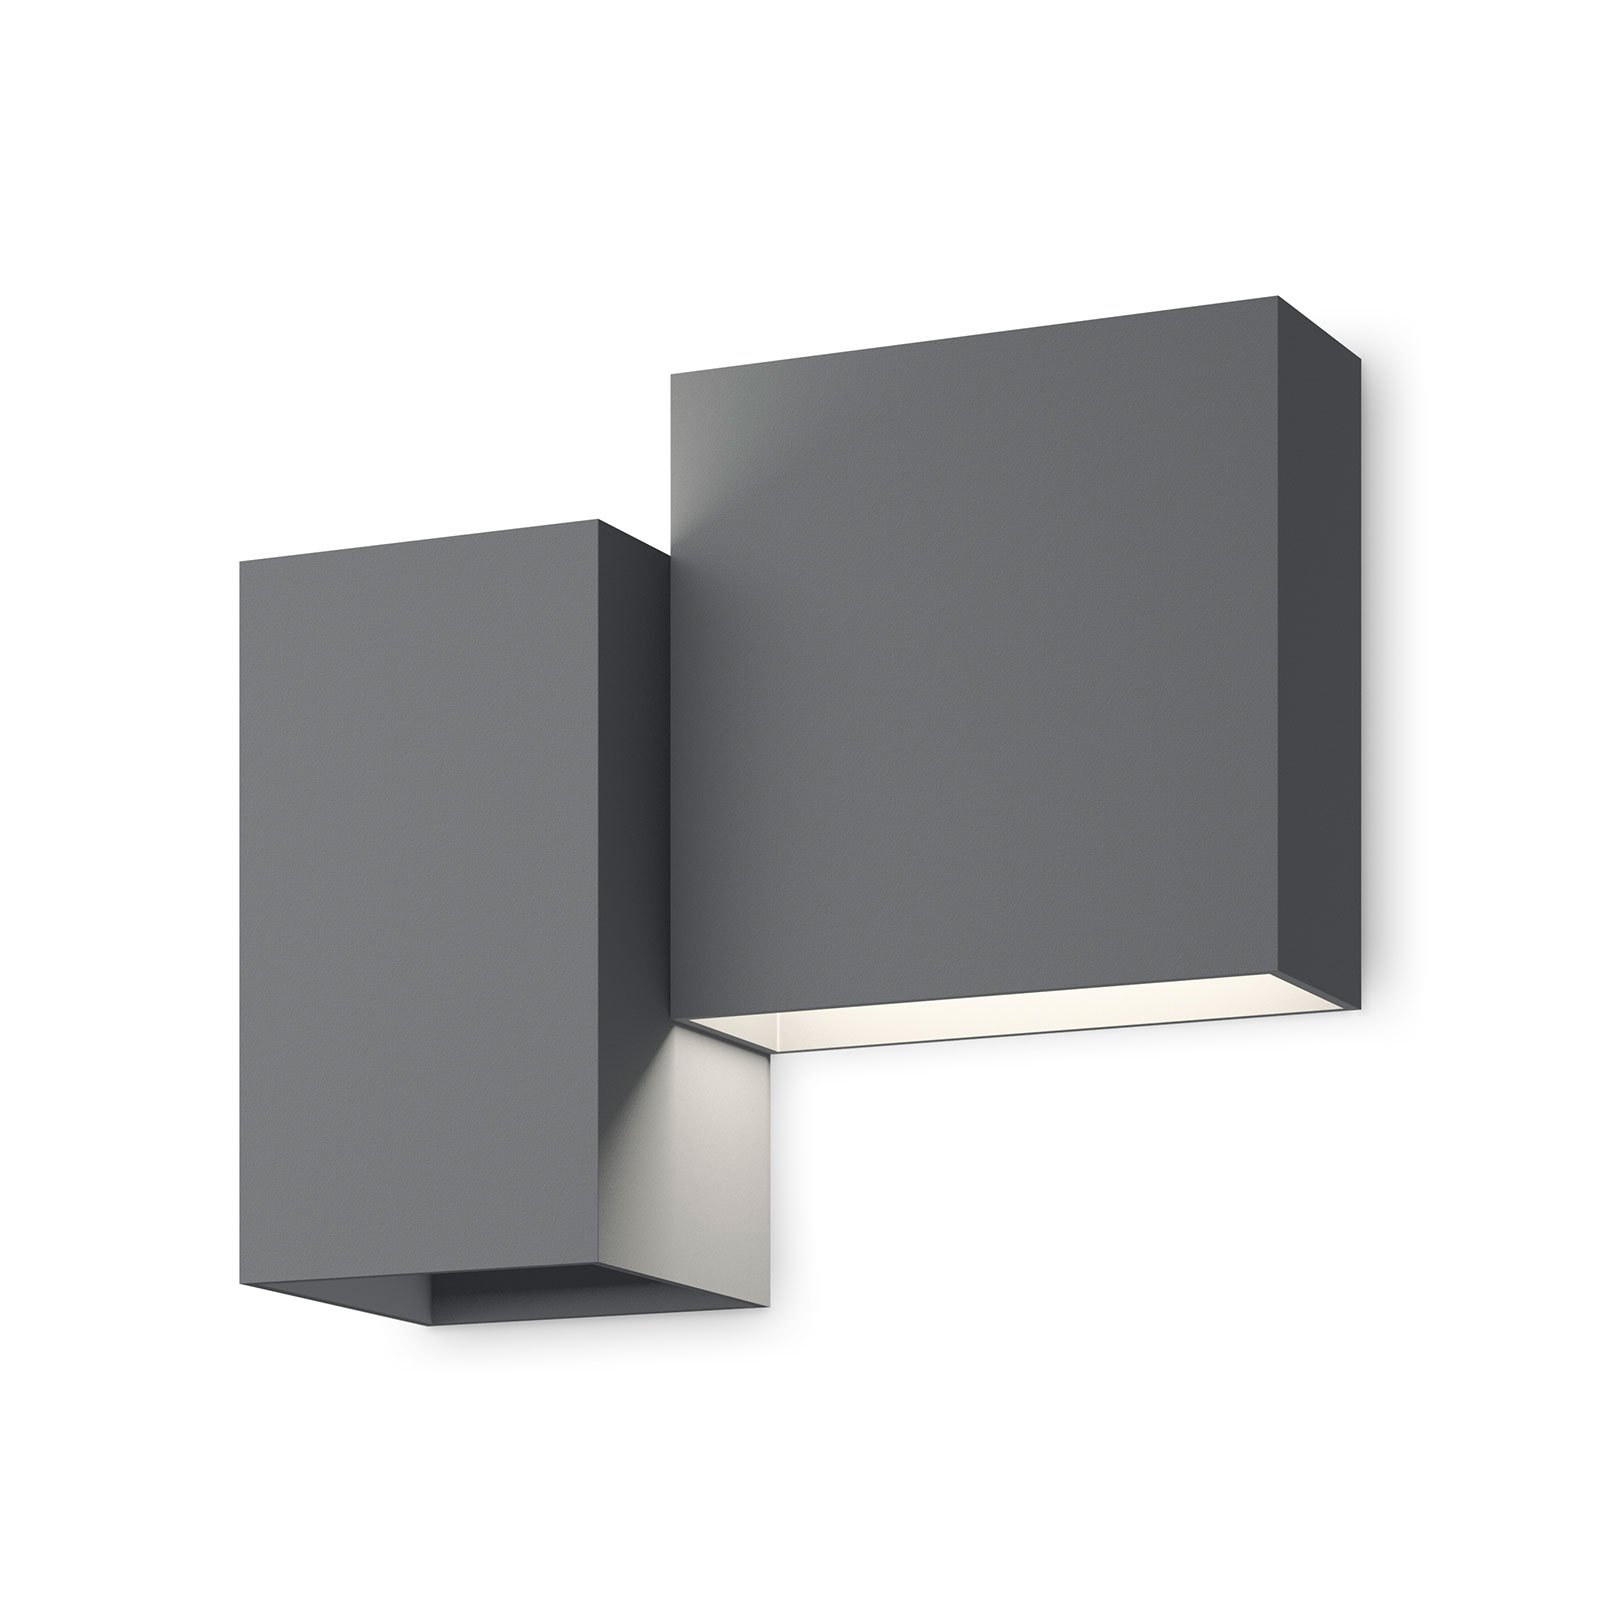 Vibia Structural 2602 LED wall light, dark grey